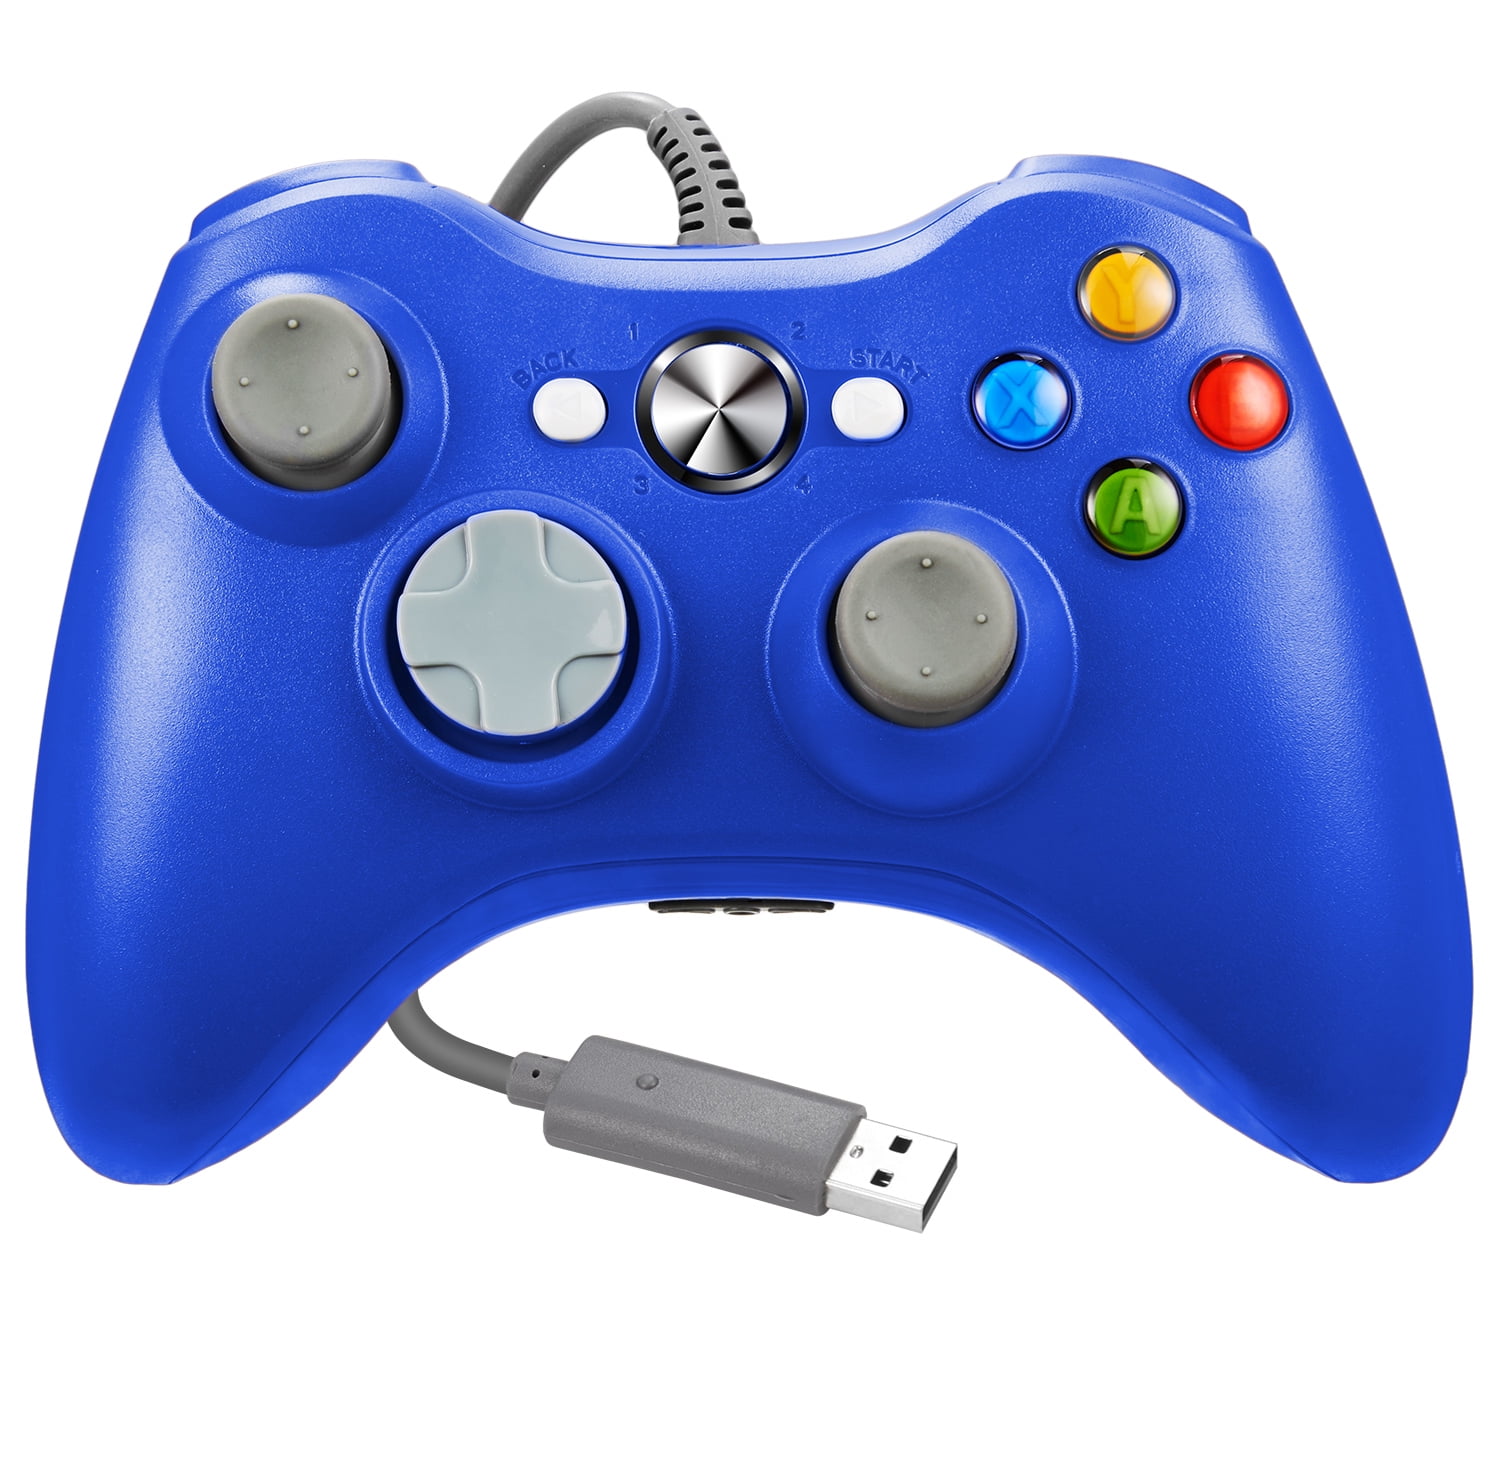 LUXMO Xbox 360 Wired Controlle with Shoulders Buttons for Xbox 360/Xbox 360 Slim/PC Windows 7 8 10 Game (Blue) - image 1 of 7